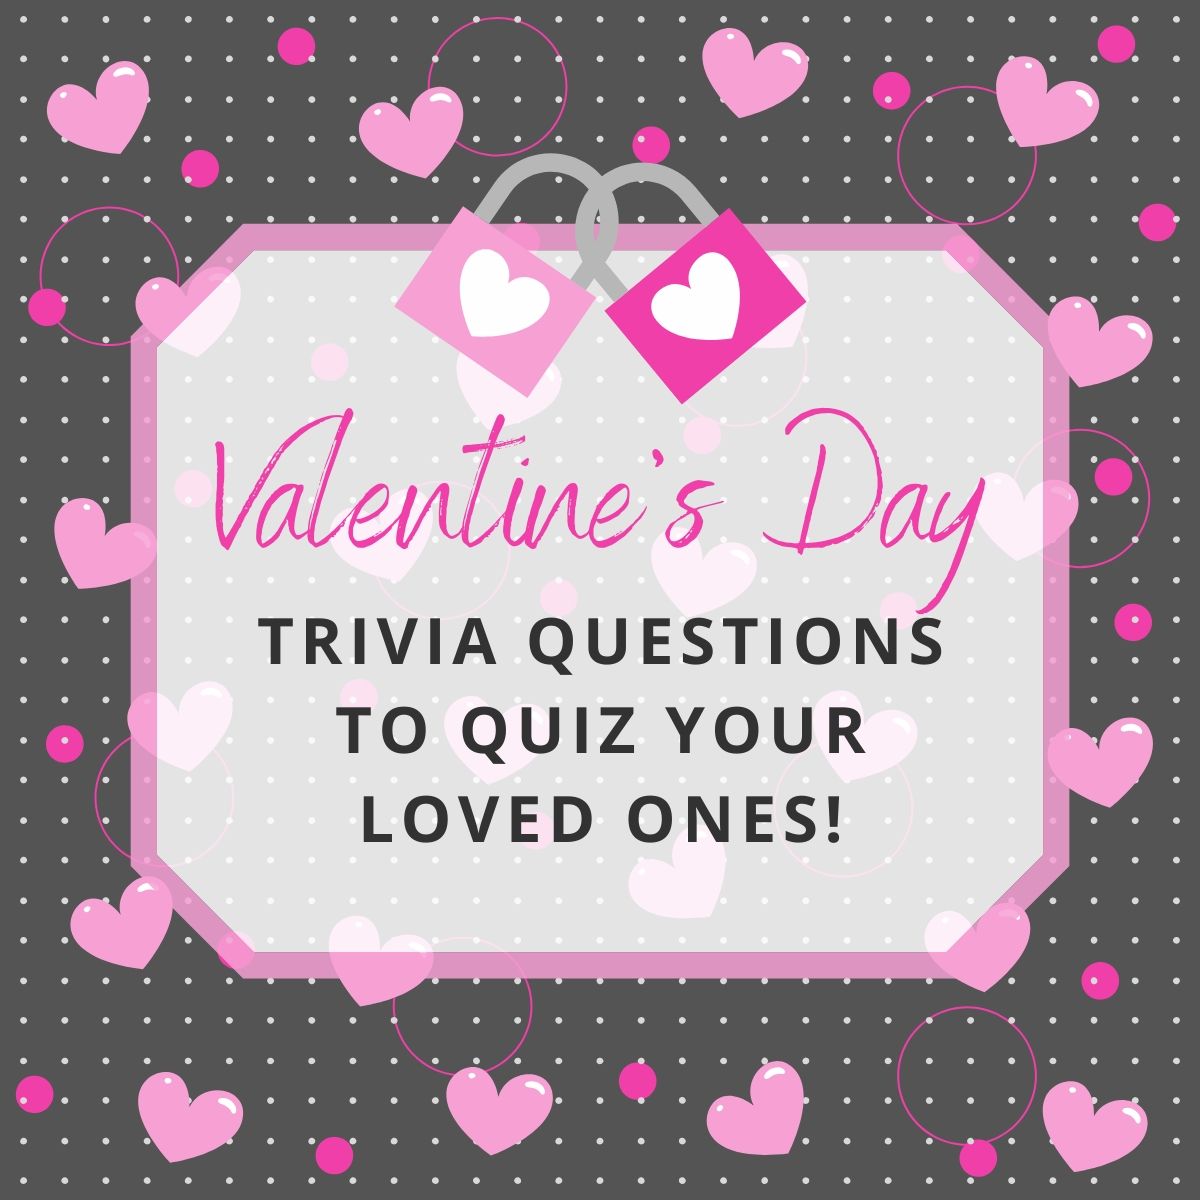 30 Fun Valentine S Day Trivia Questions To Test Your Loved Ones